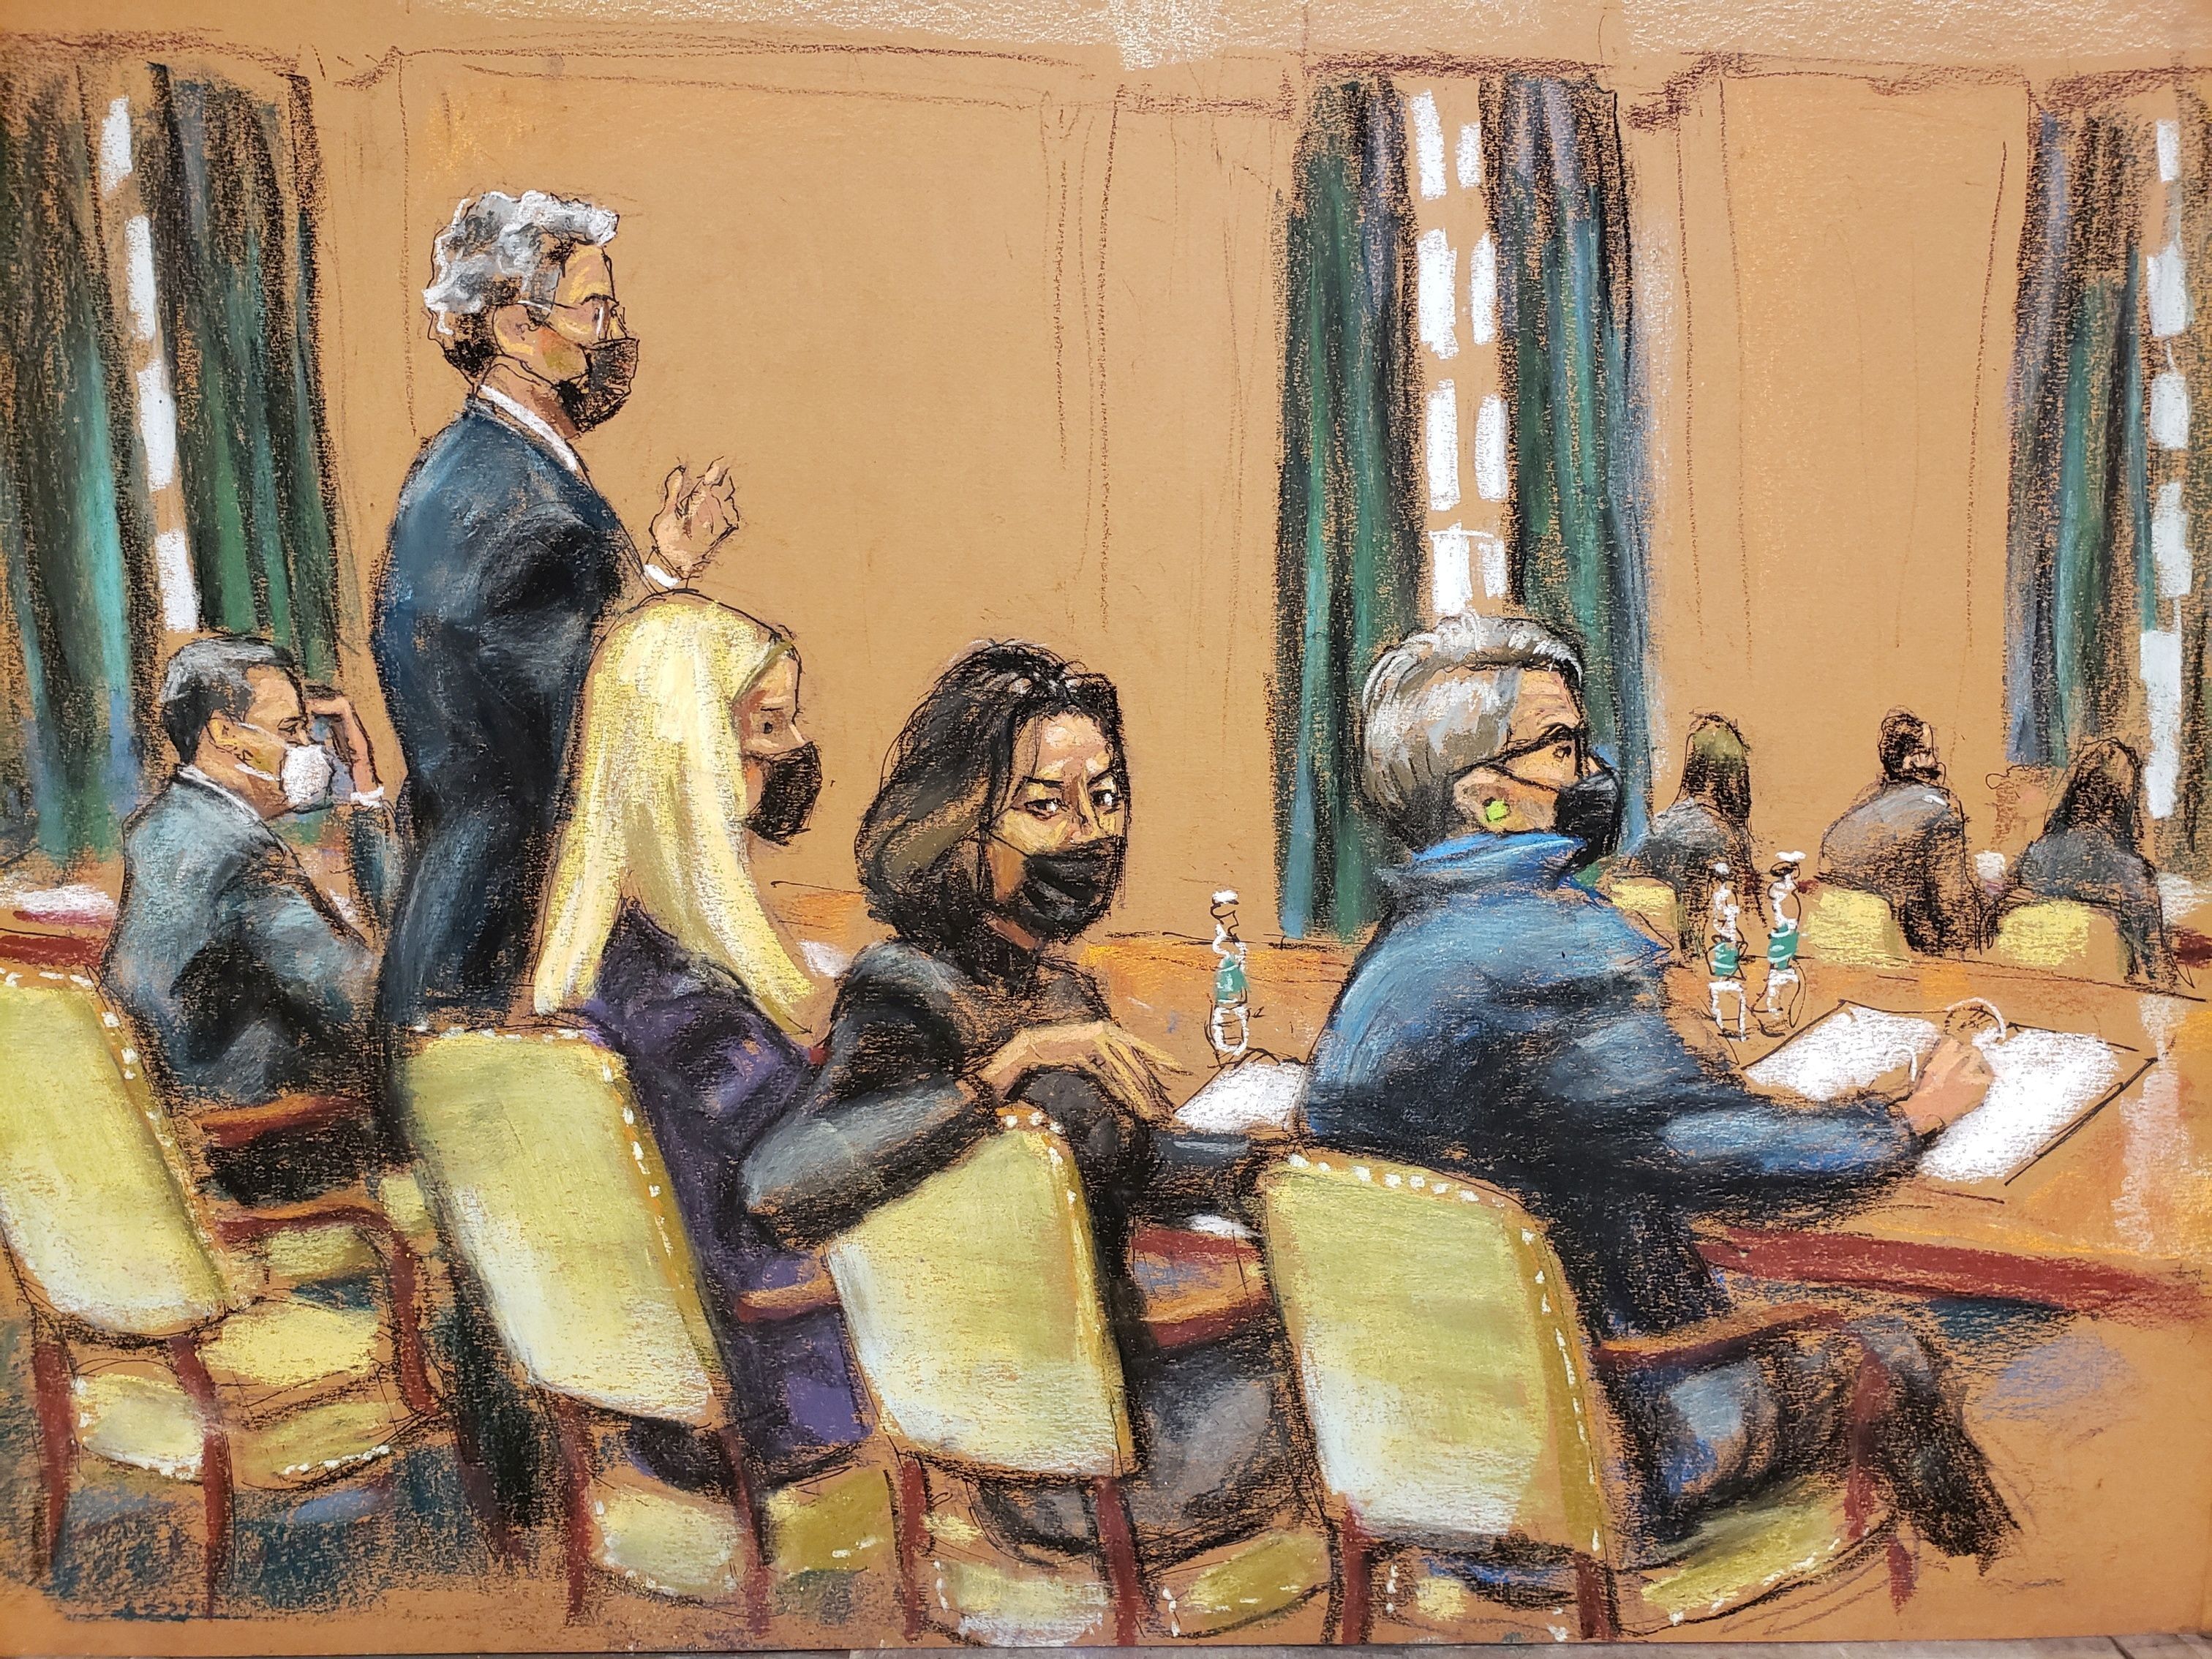 Ghislaine Maxwell sits with her lawyers Christian Everdell, Jeffrey Pagliuca, Bobbi Sternheim and Laura Menninger during jury selection in the trial of Maxwell, Jeffrey Epstein's associate accused of sex trafficking, in a courtroom sketch in New York City, U.S., November 16, 2021. REUTERS/Jane Rosenberg